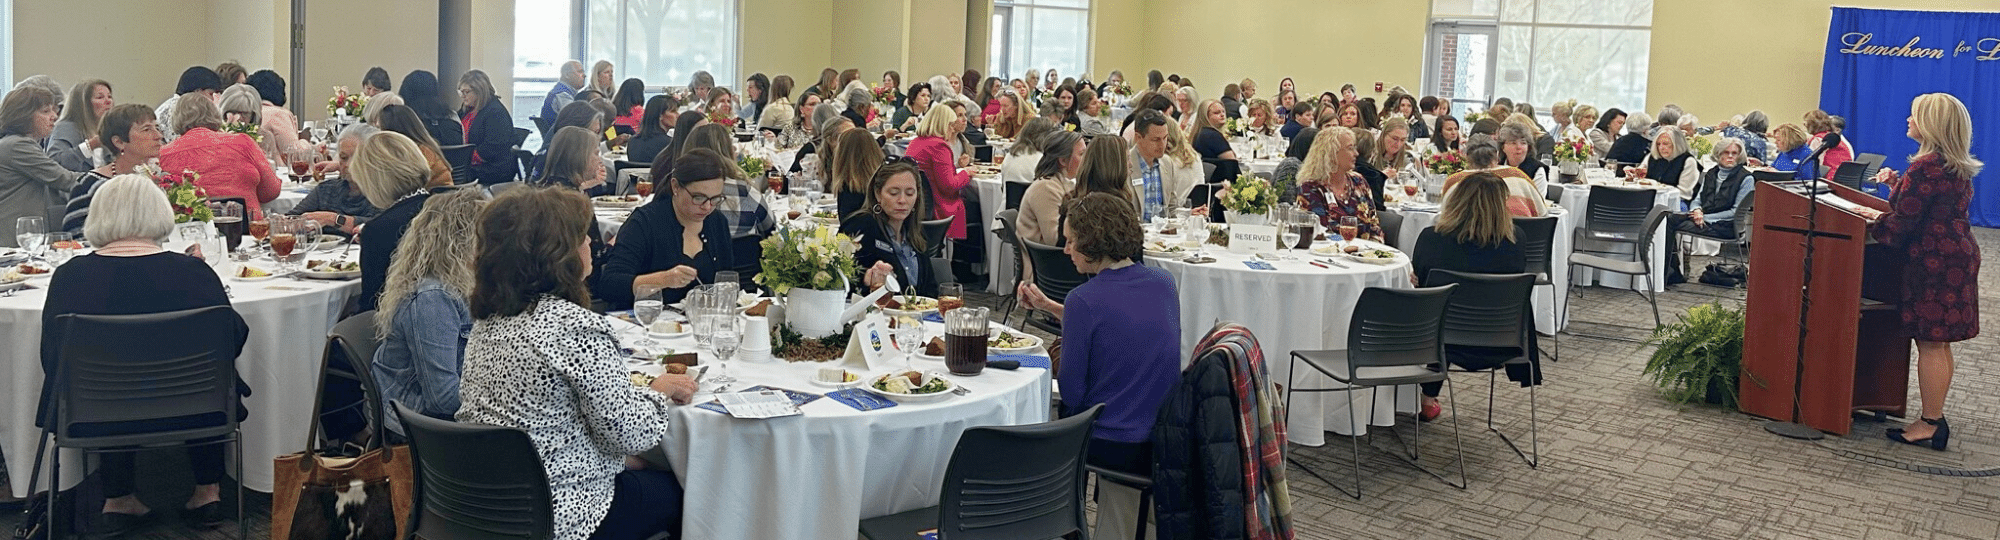 Luncheon for Literacy attendees at tables listening to presenter